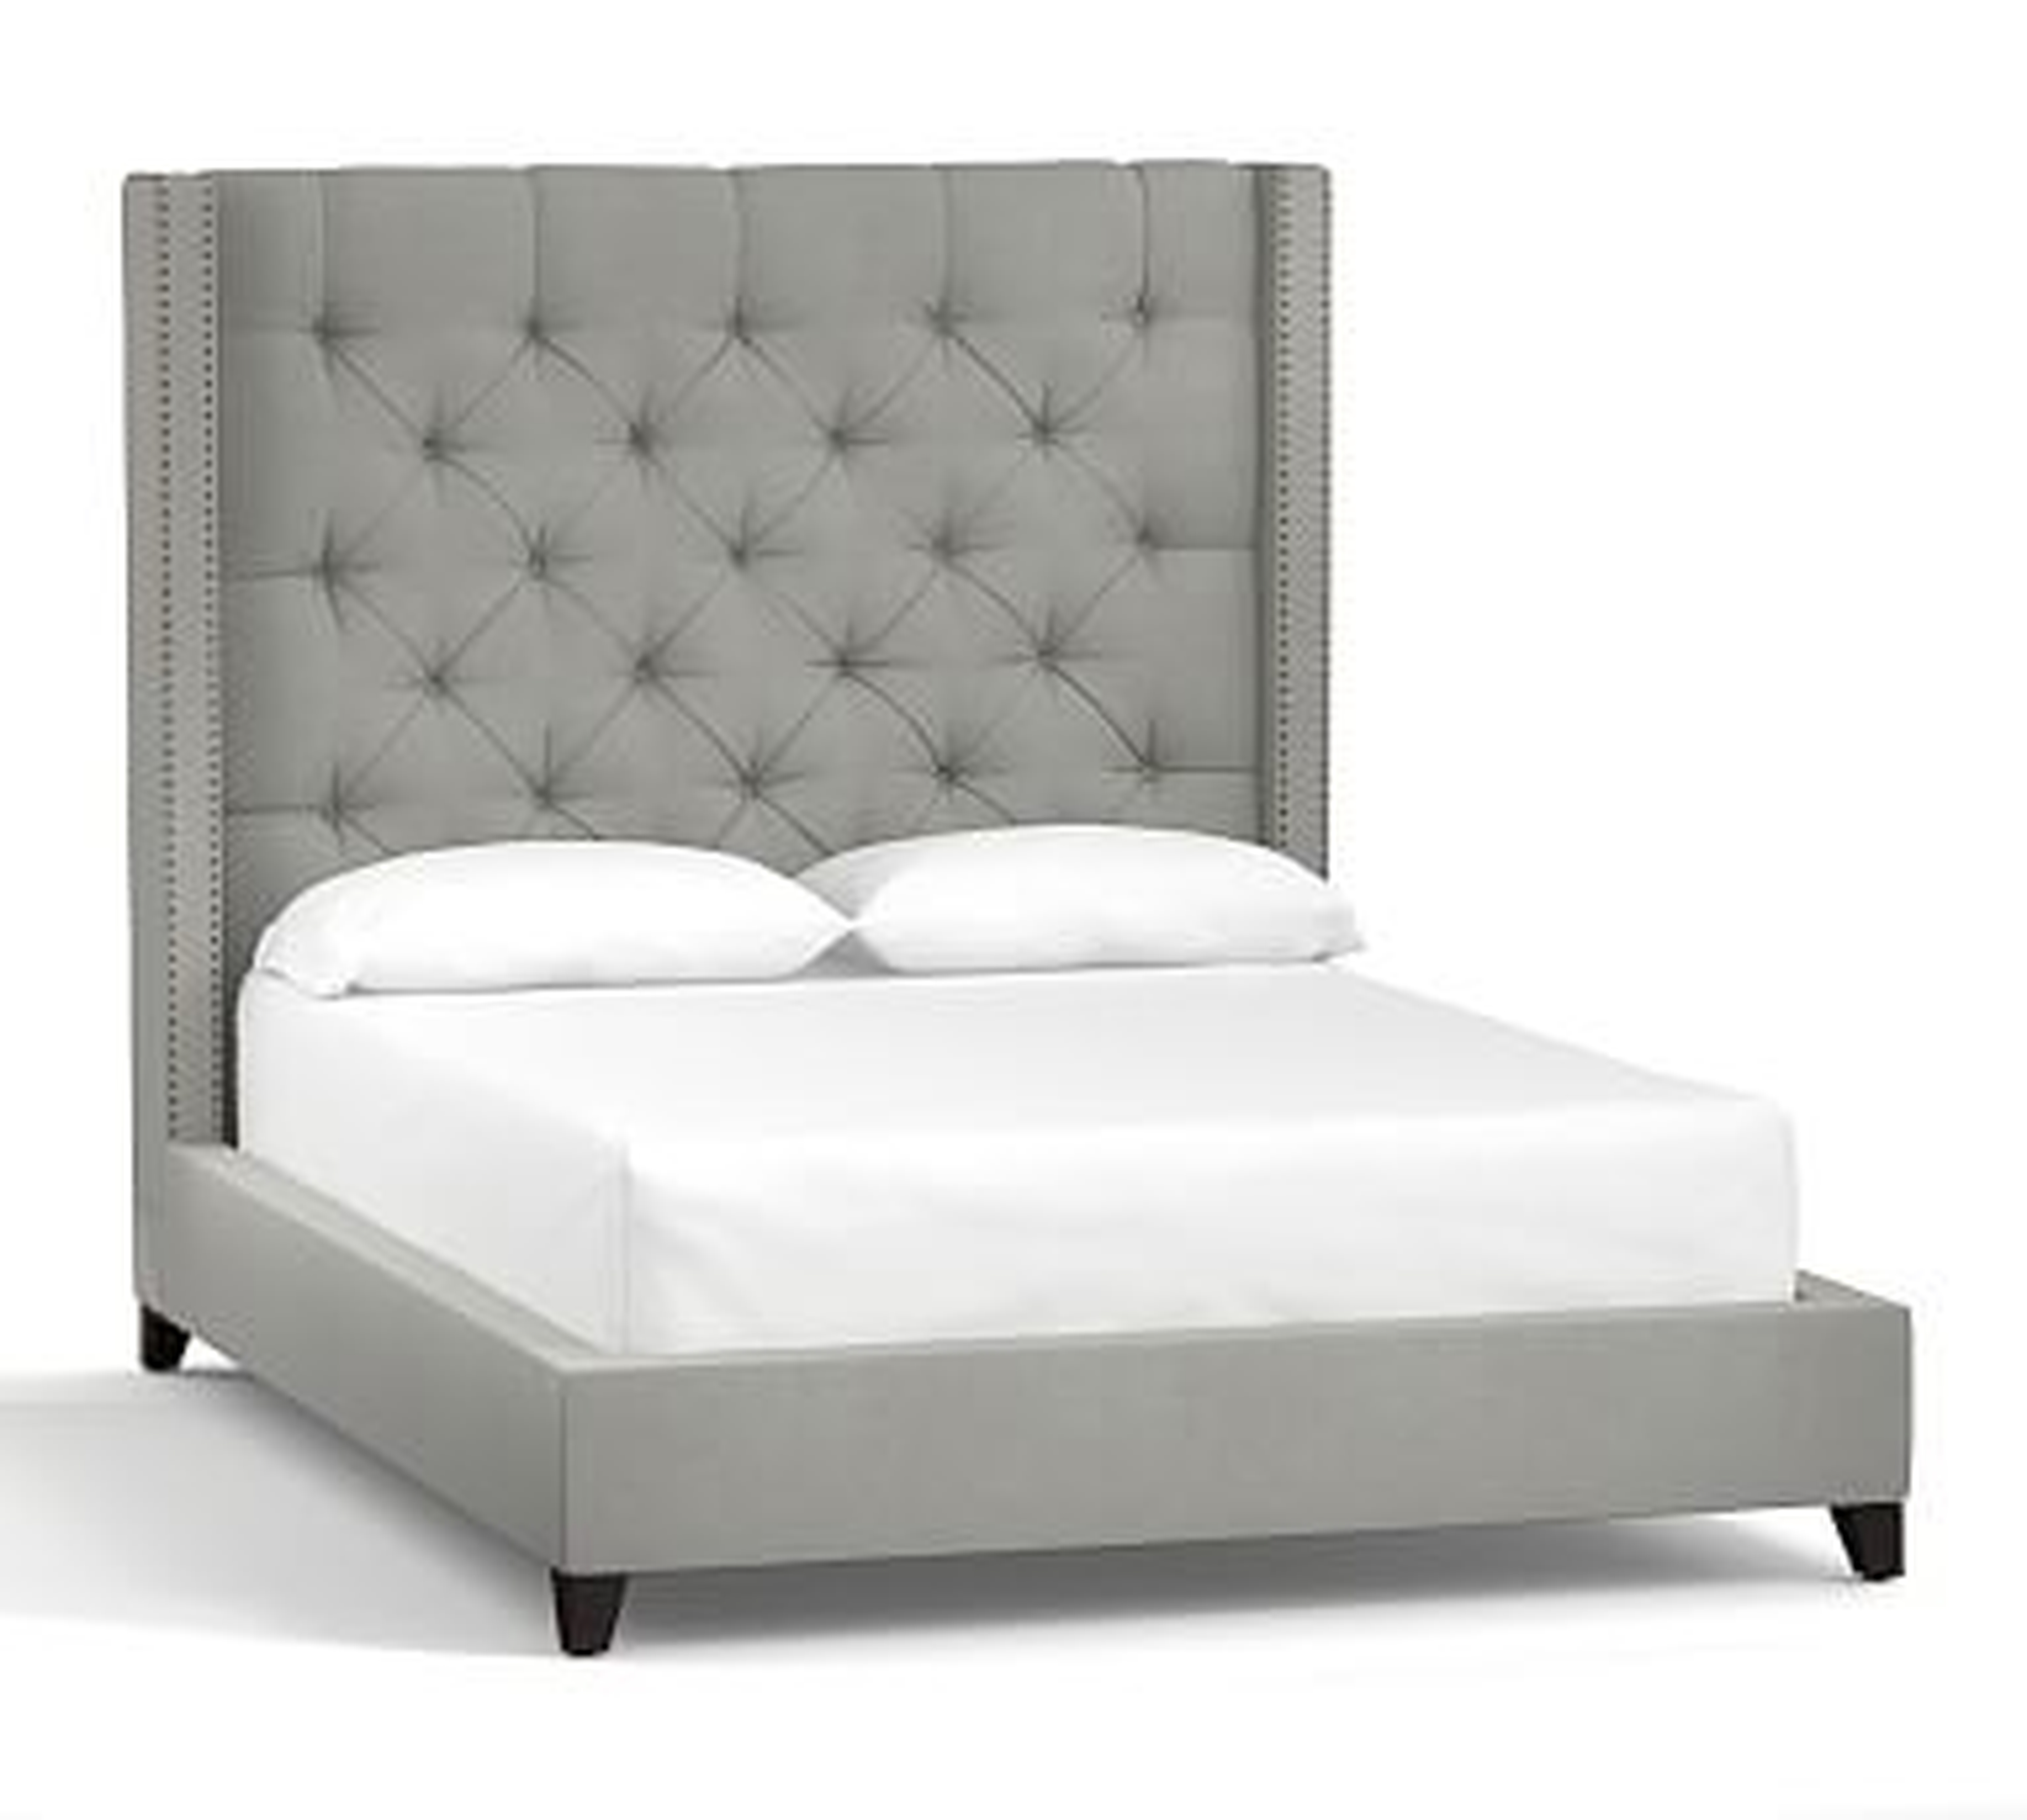 Harper Tufted Upholstered Bed with Bronze Nailheads, King, Tall Headboard65"h, Performance Everydaysuede(TM) Metal Gray - Pottery Barn